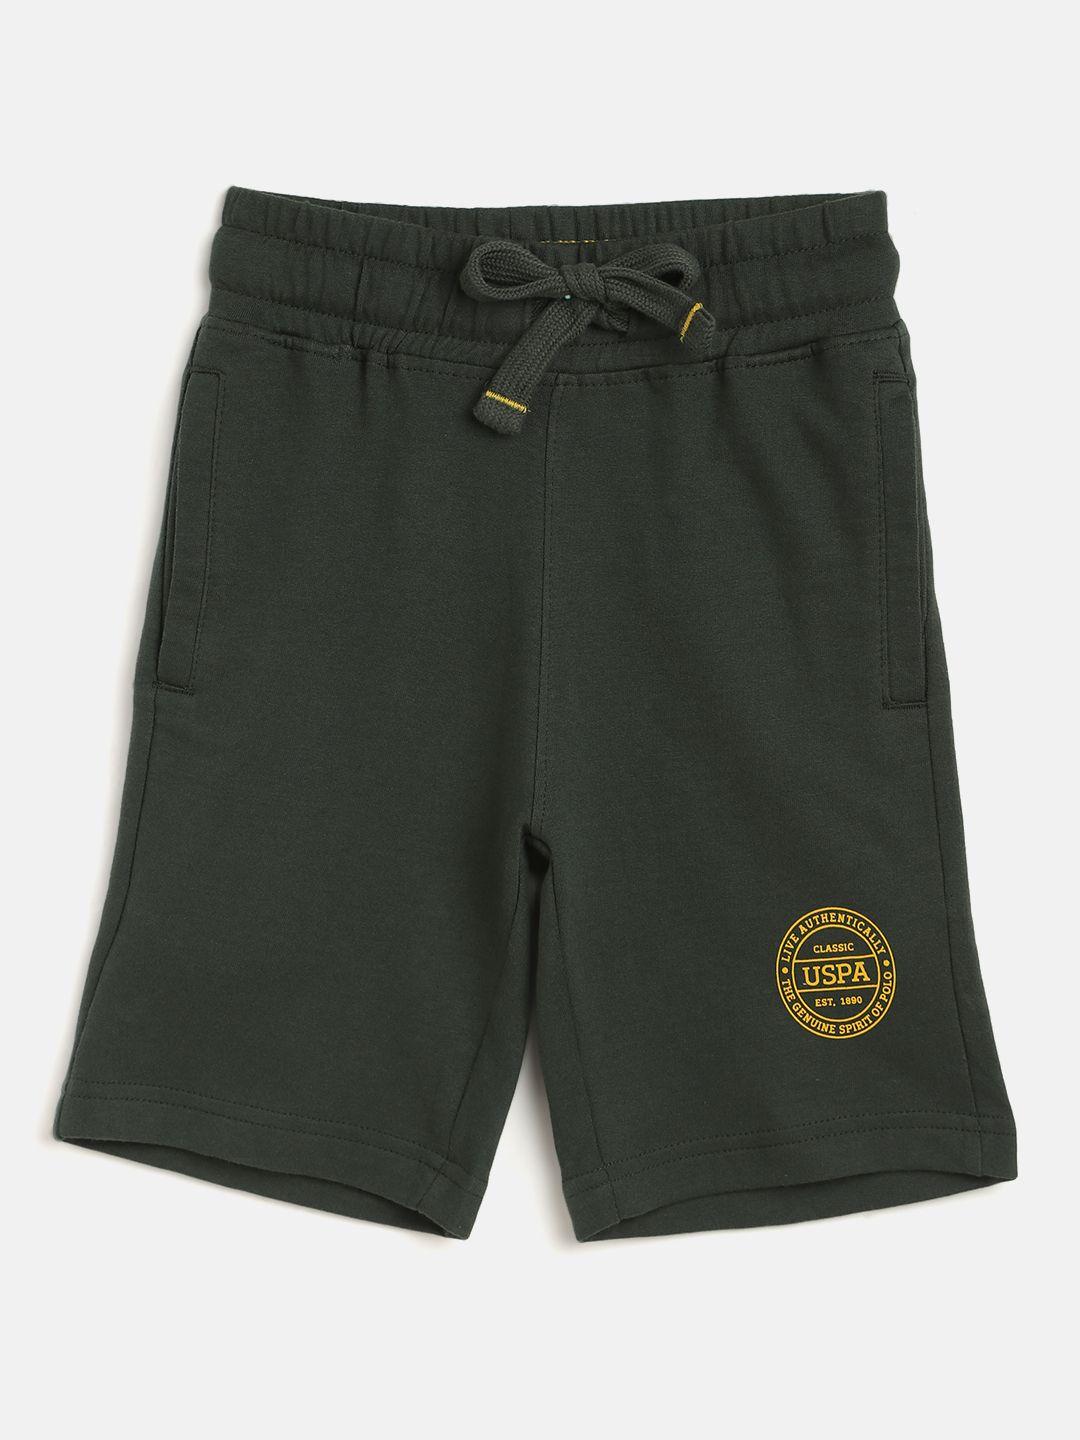 u.s. polo assn. kids boys olive green cotton solid lounge shorts